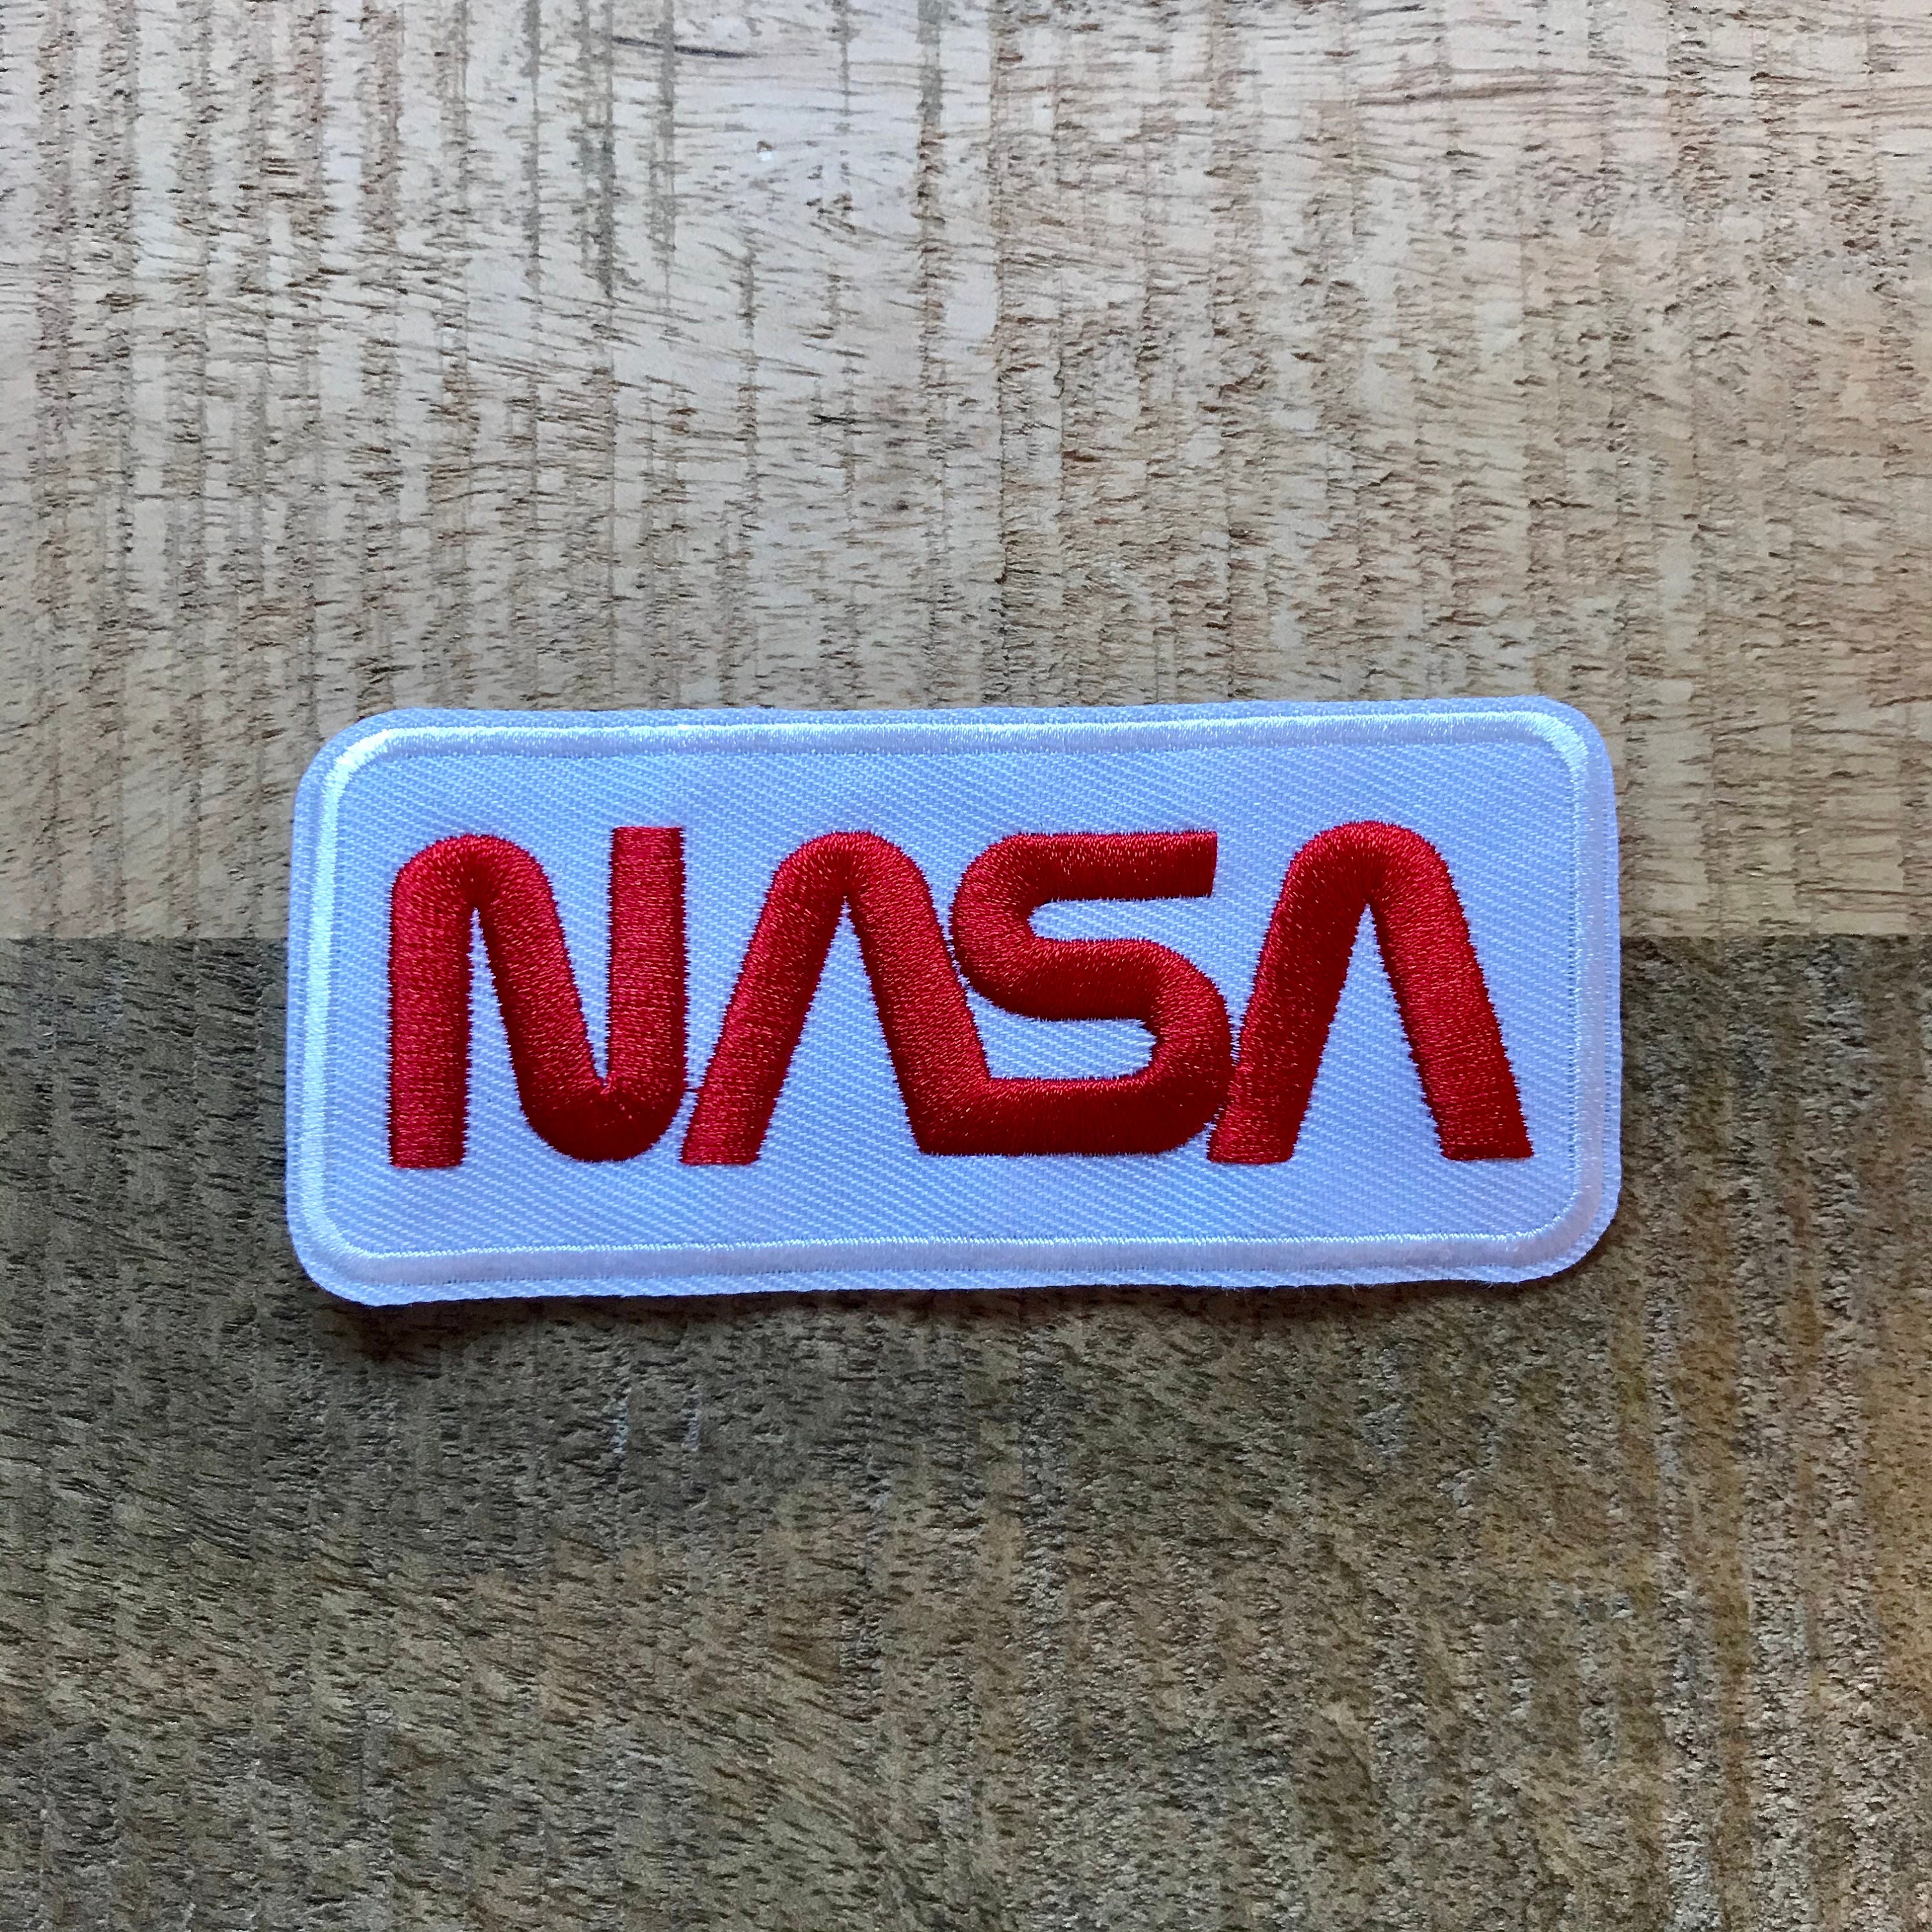 NASA Astronaut Set Patches Space Explorer Moon Embroidered Sew on Iron on Patch  Badge DIY Costume Demogorgon Patches DP 